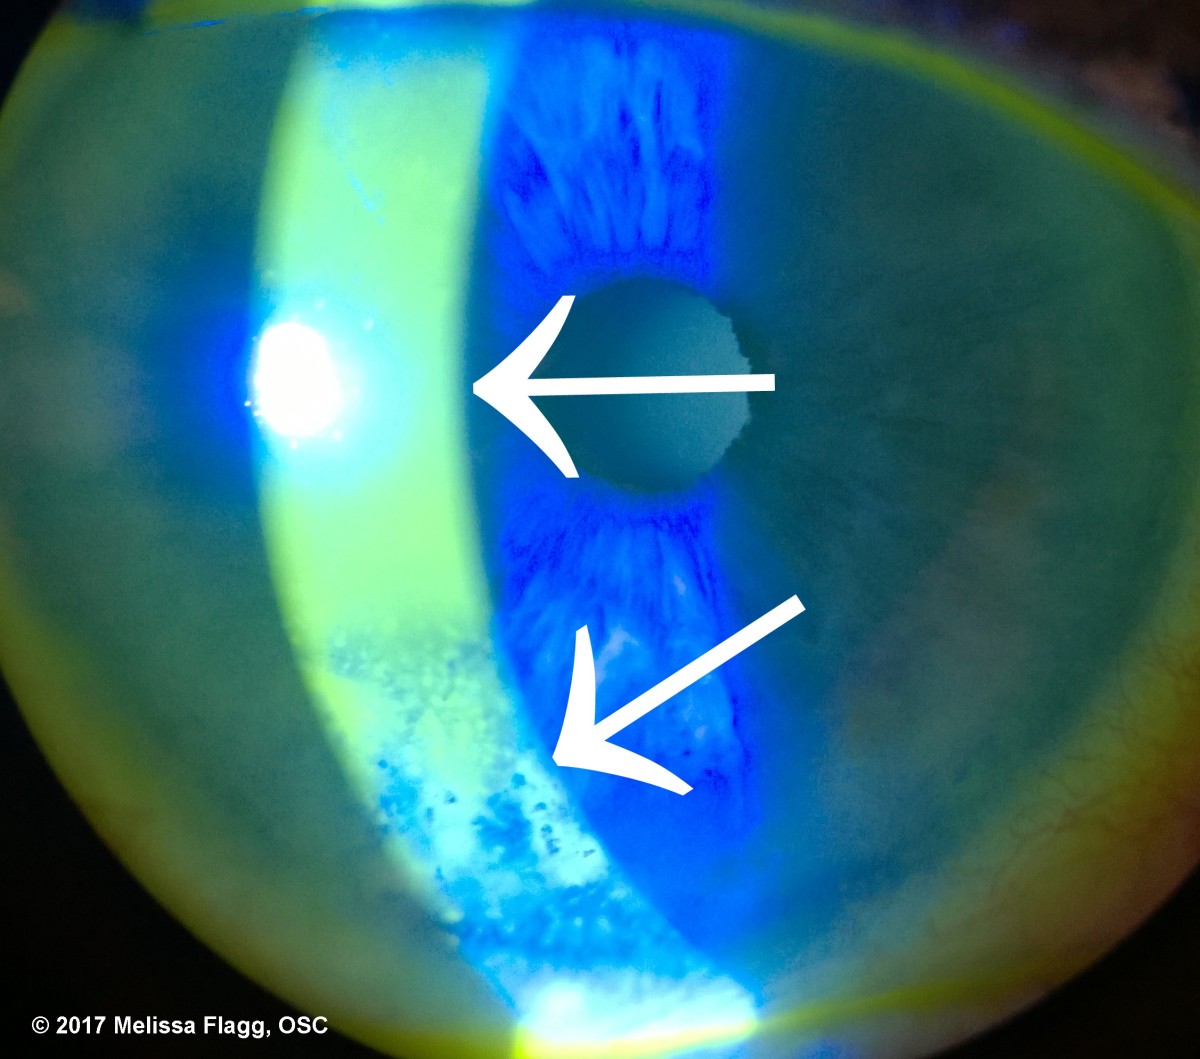 An image showing evaporative dry eye (bottom error) in a patient who does not close their eyes completely when sleeping